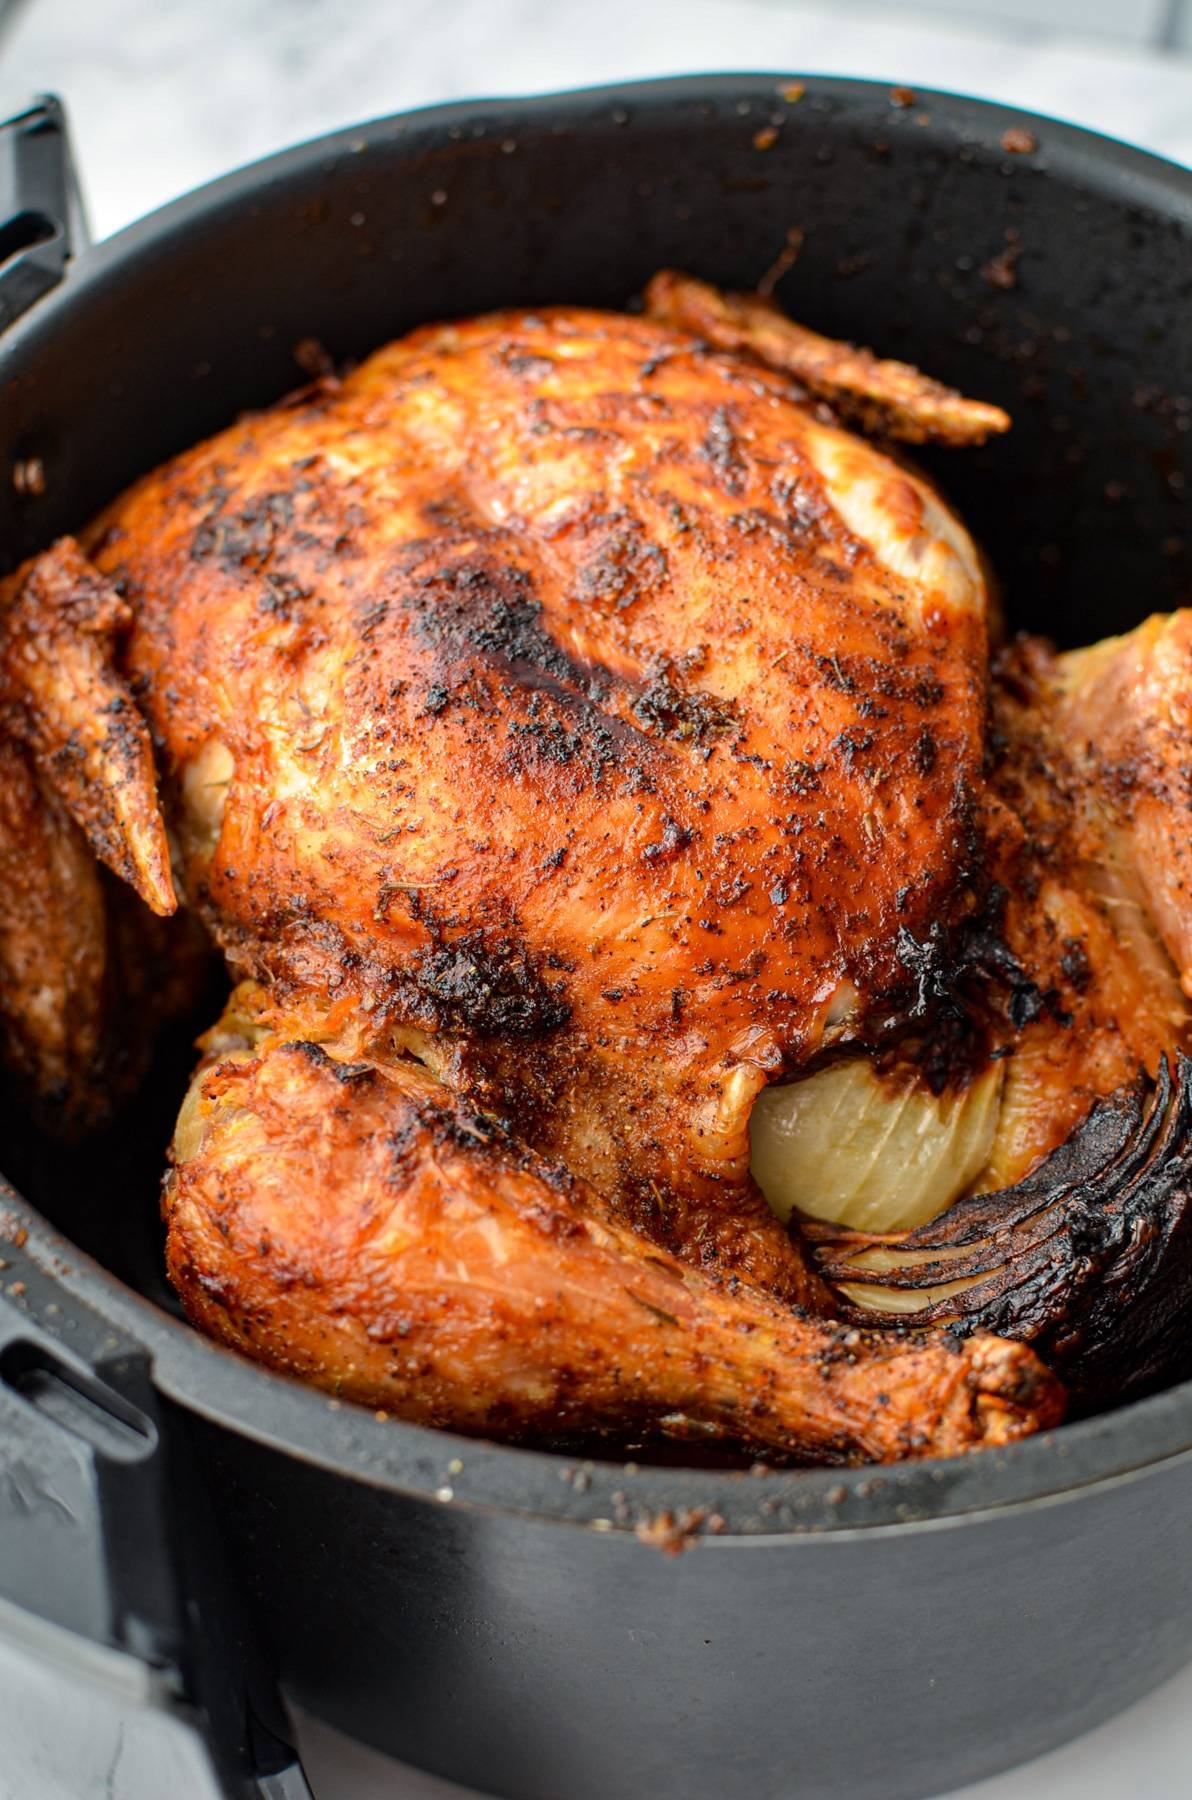 A fully cooked rotisserie chicken inside of an air fryer basket.